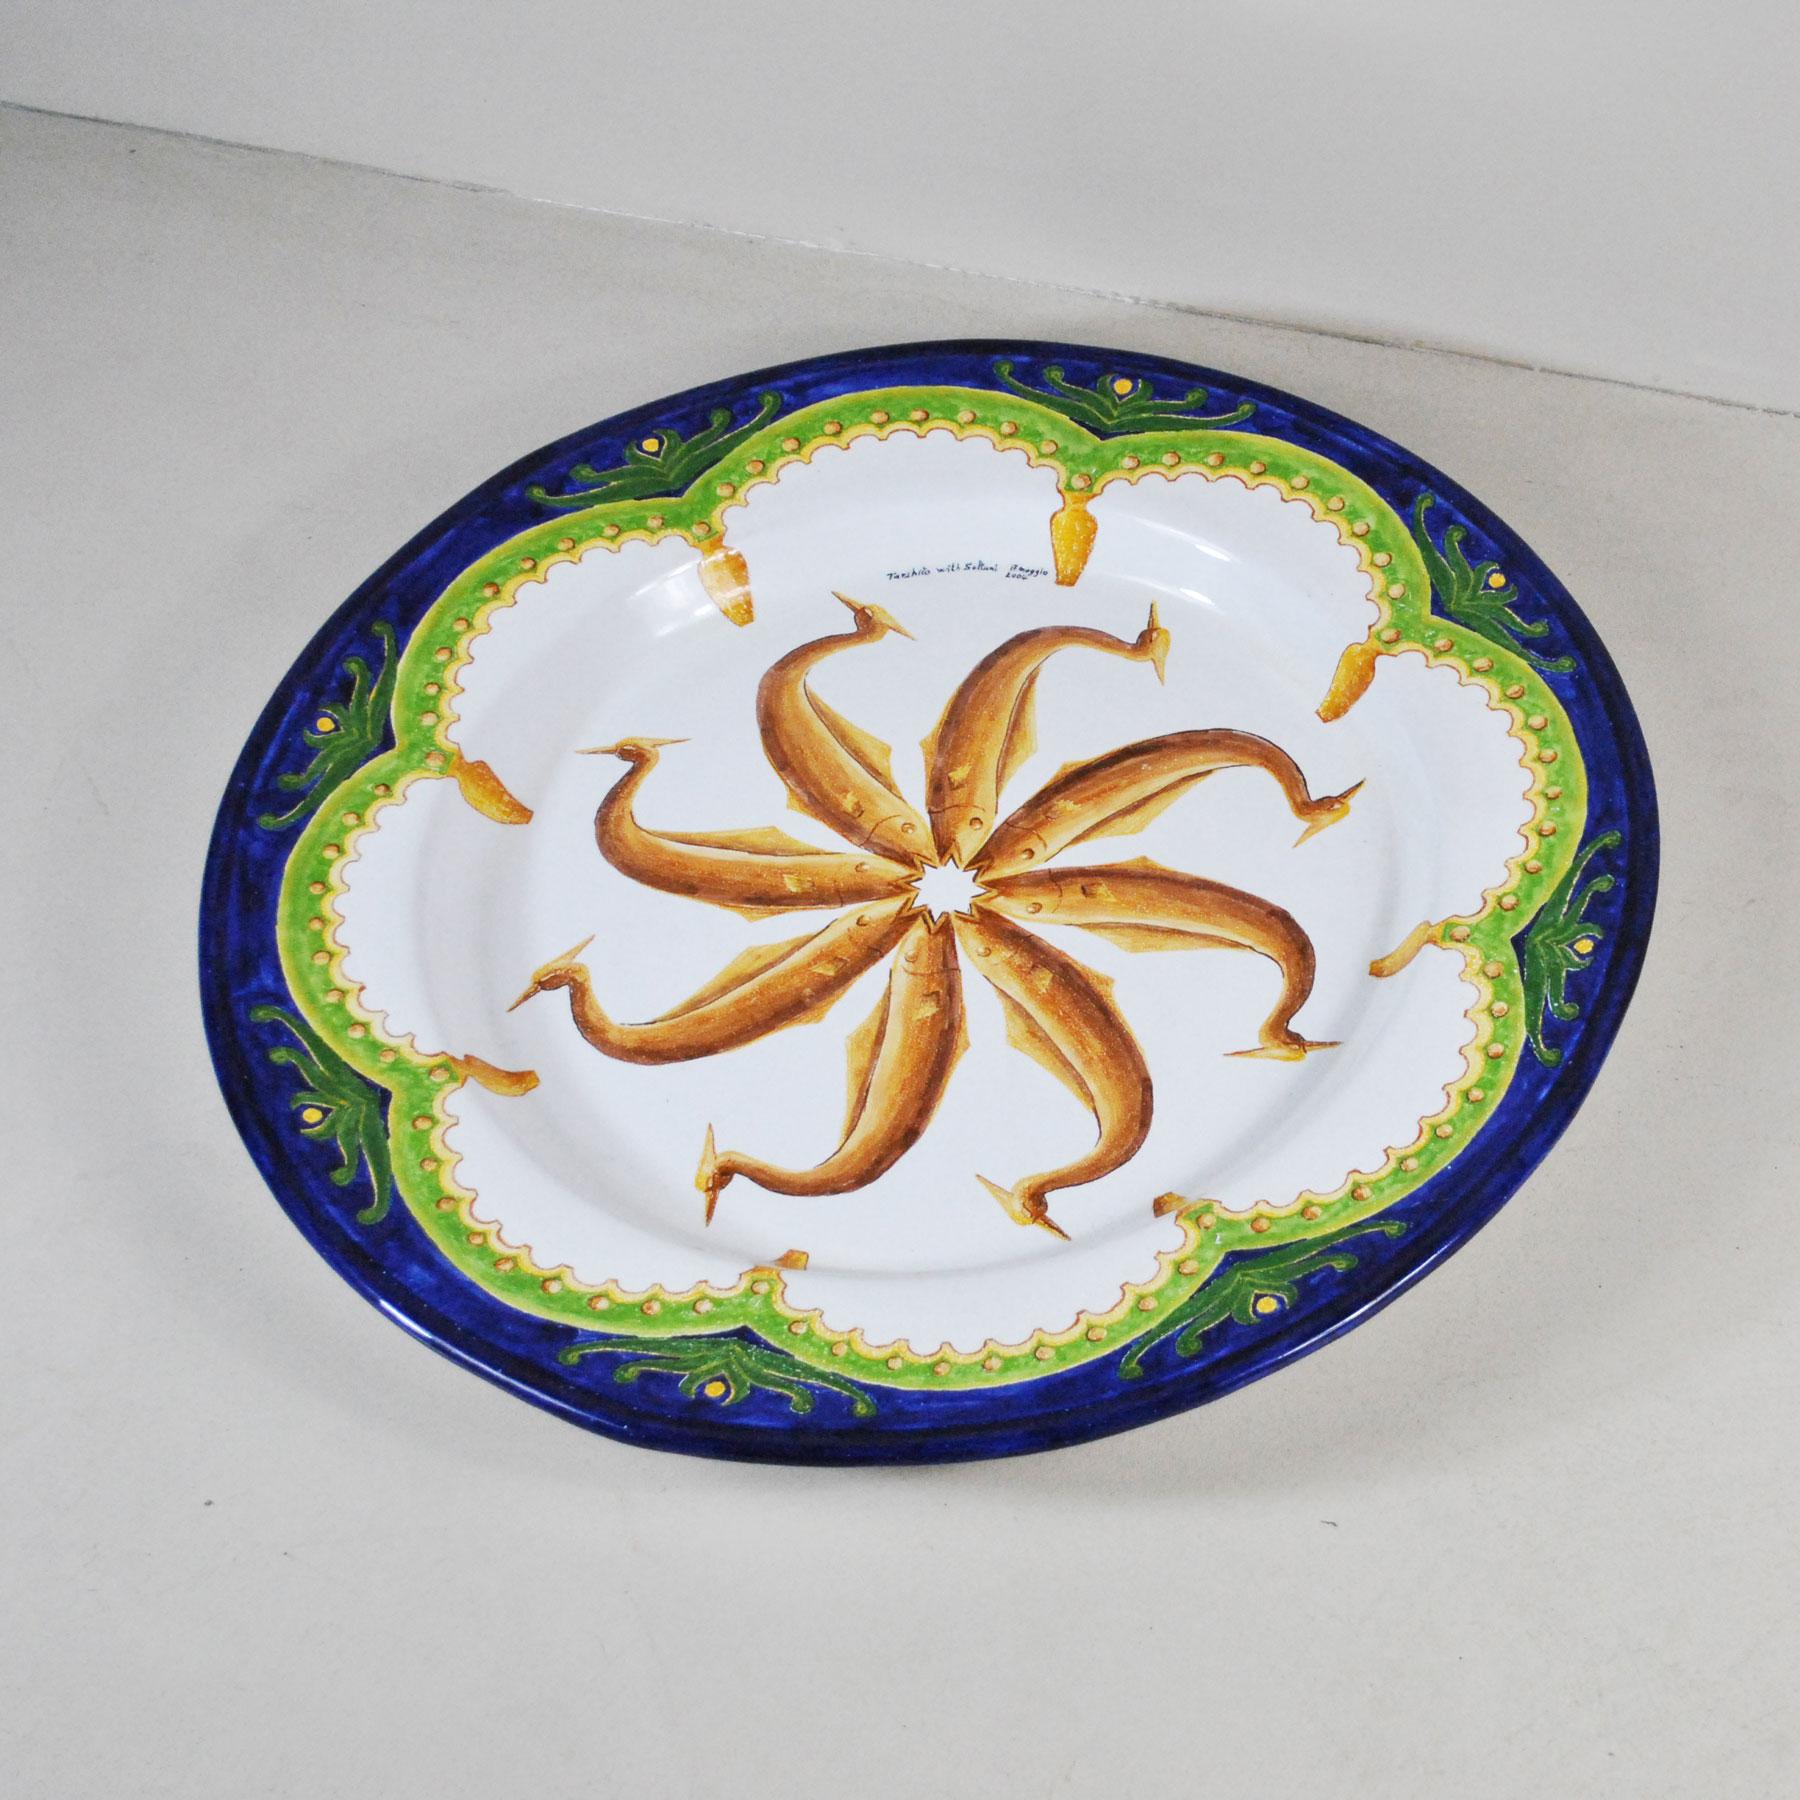 An Italian contemporary large ornamental plate centerpiece, the plate is signed by Tarshito author in the 2004.
Tarshito architect first artist after, born in Bari in southern Italy where lives and works now.